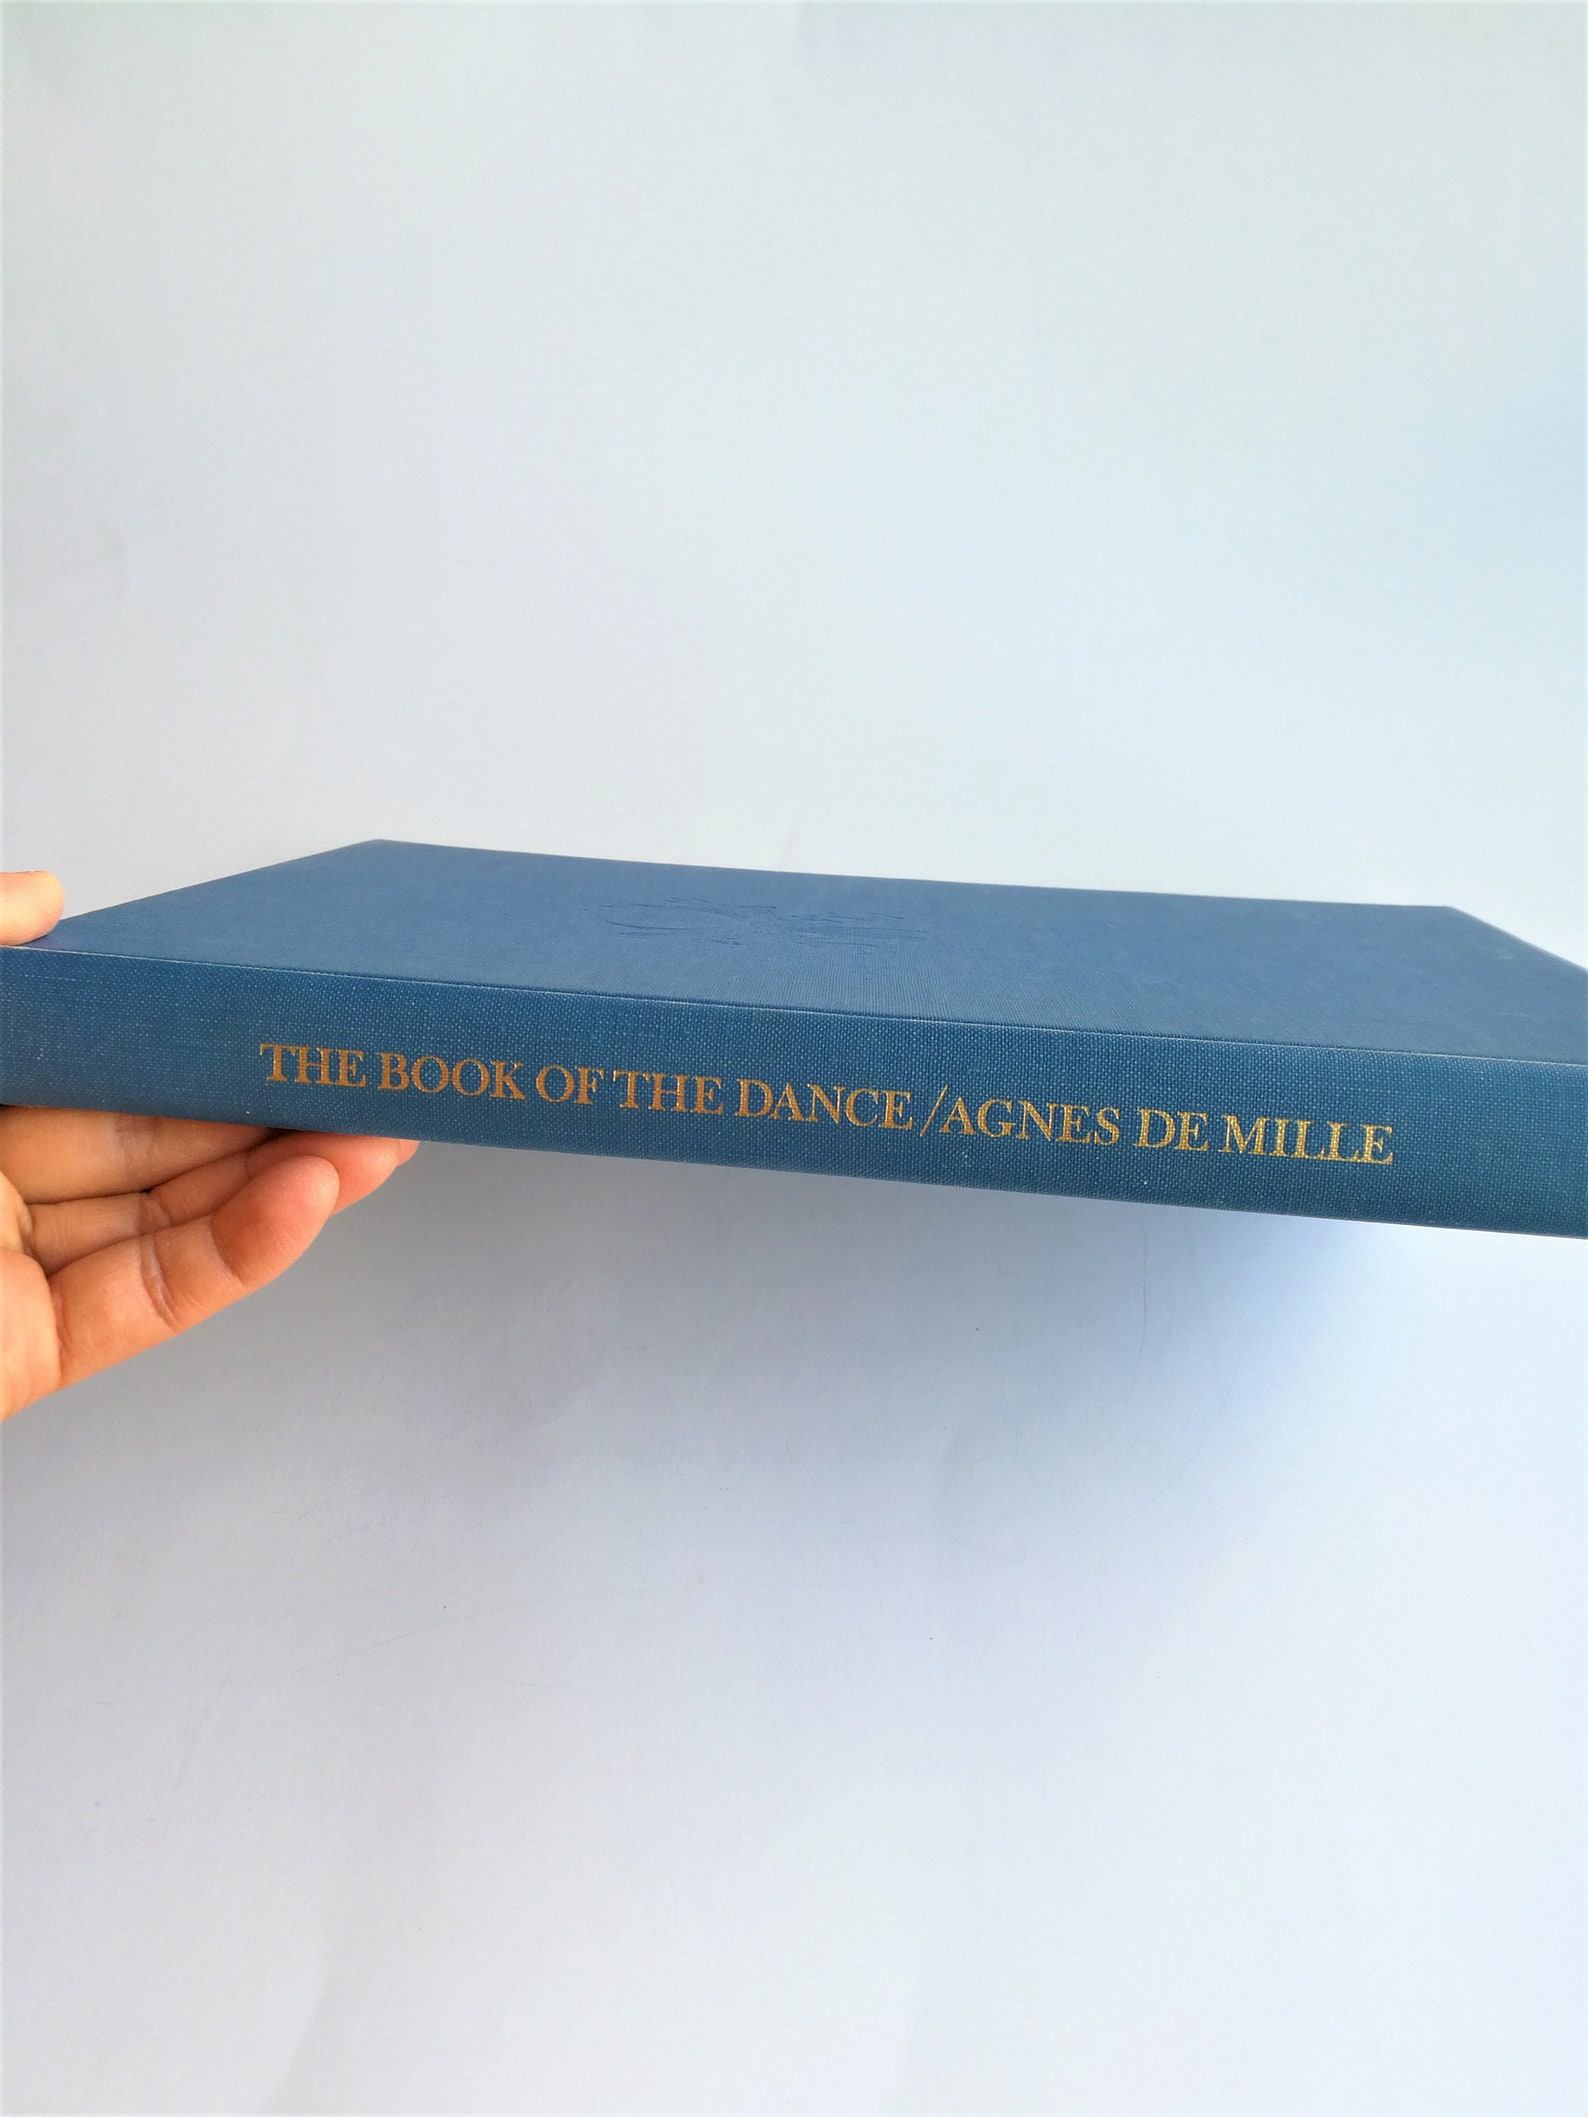 vintage 60s ballet book - the book of the dance - agnes de mille - deluxe goldencraft edition - hard cover - out of print - moth